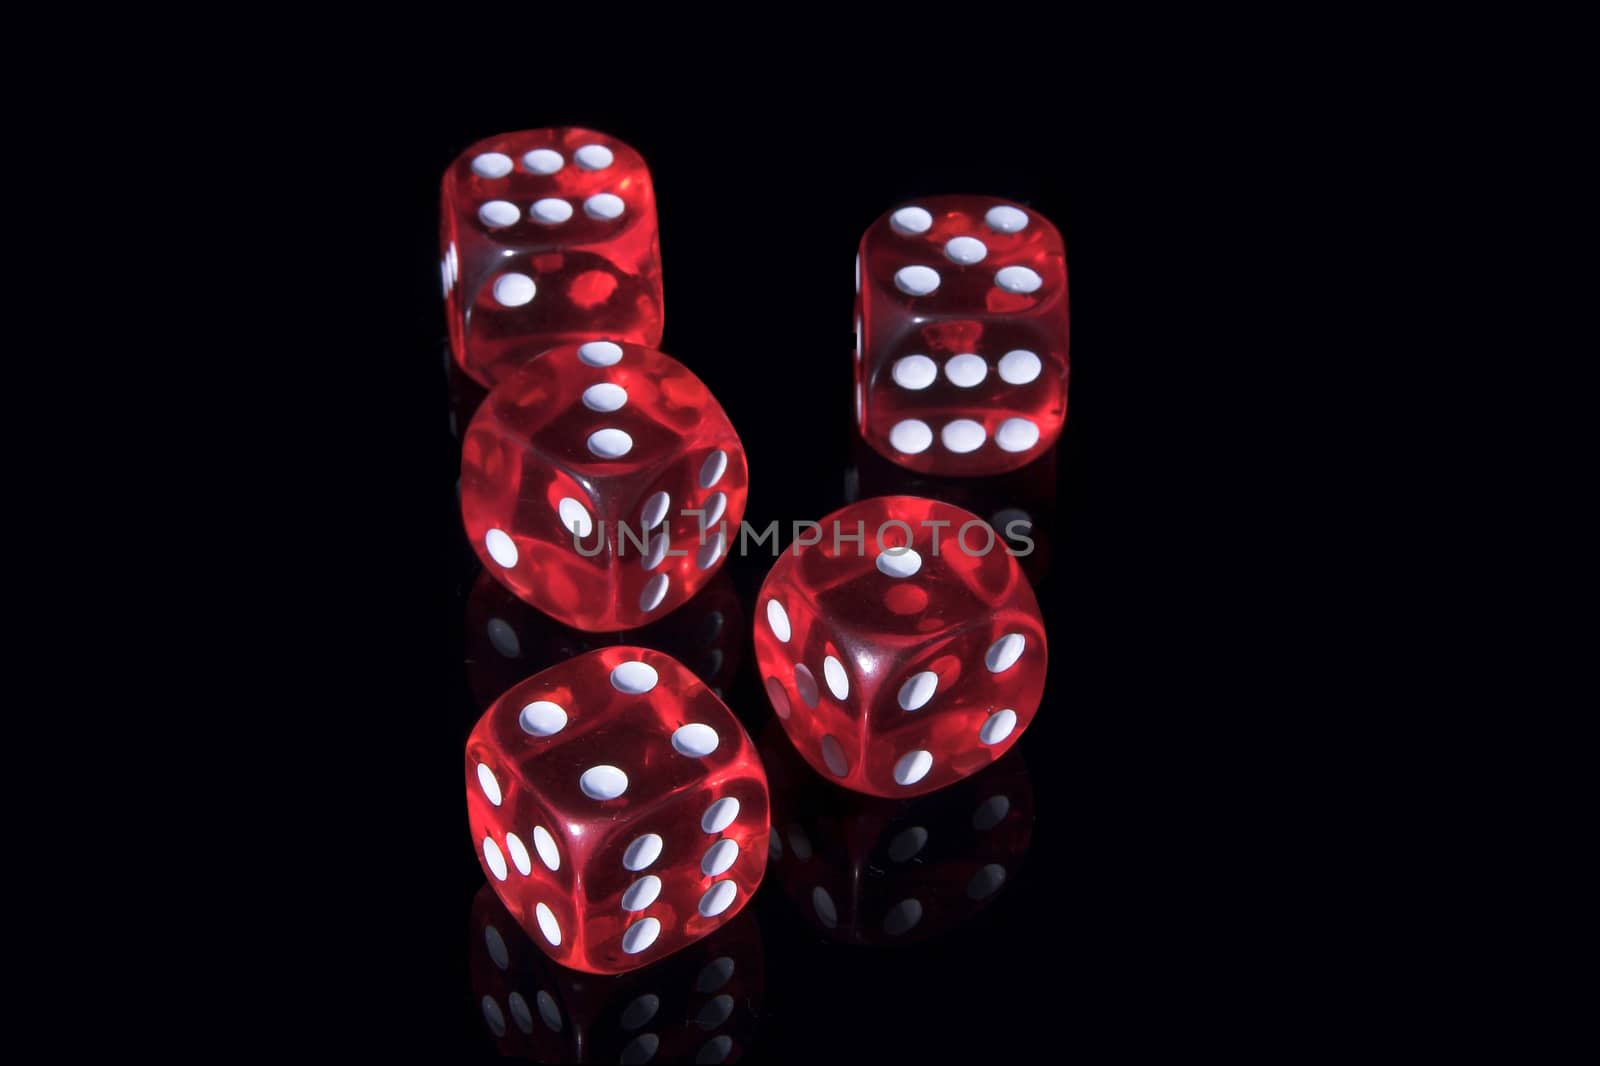 Casino dices by Chemik11